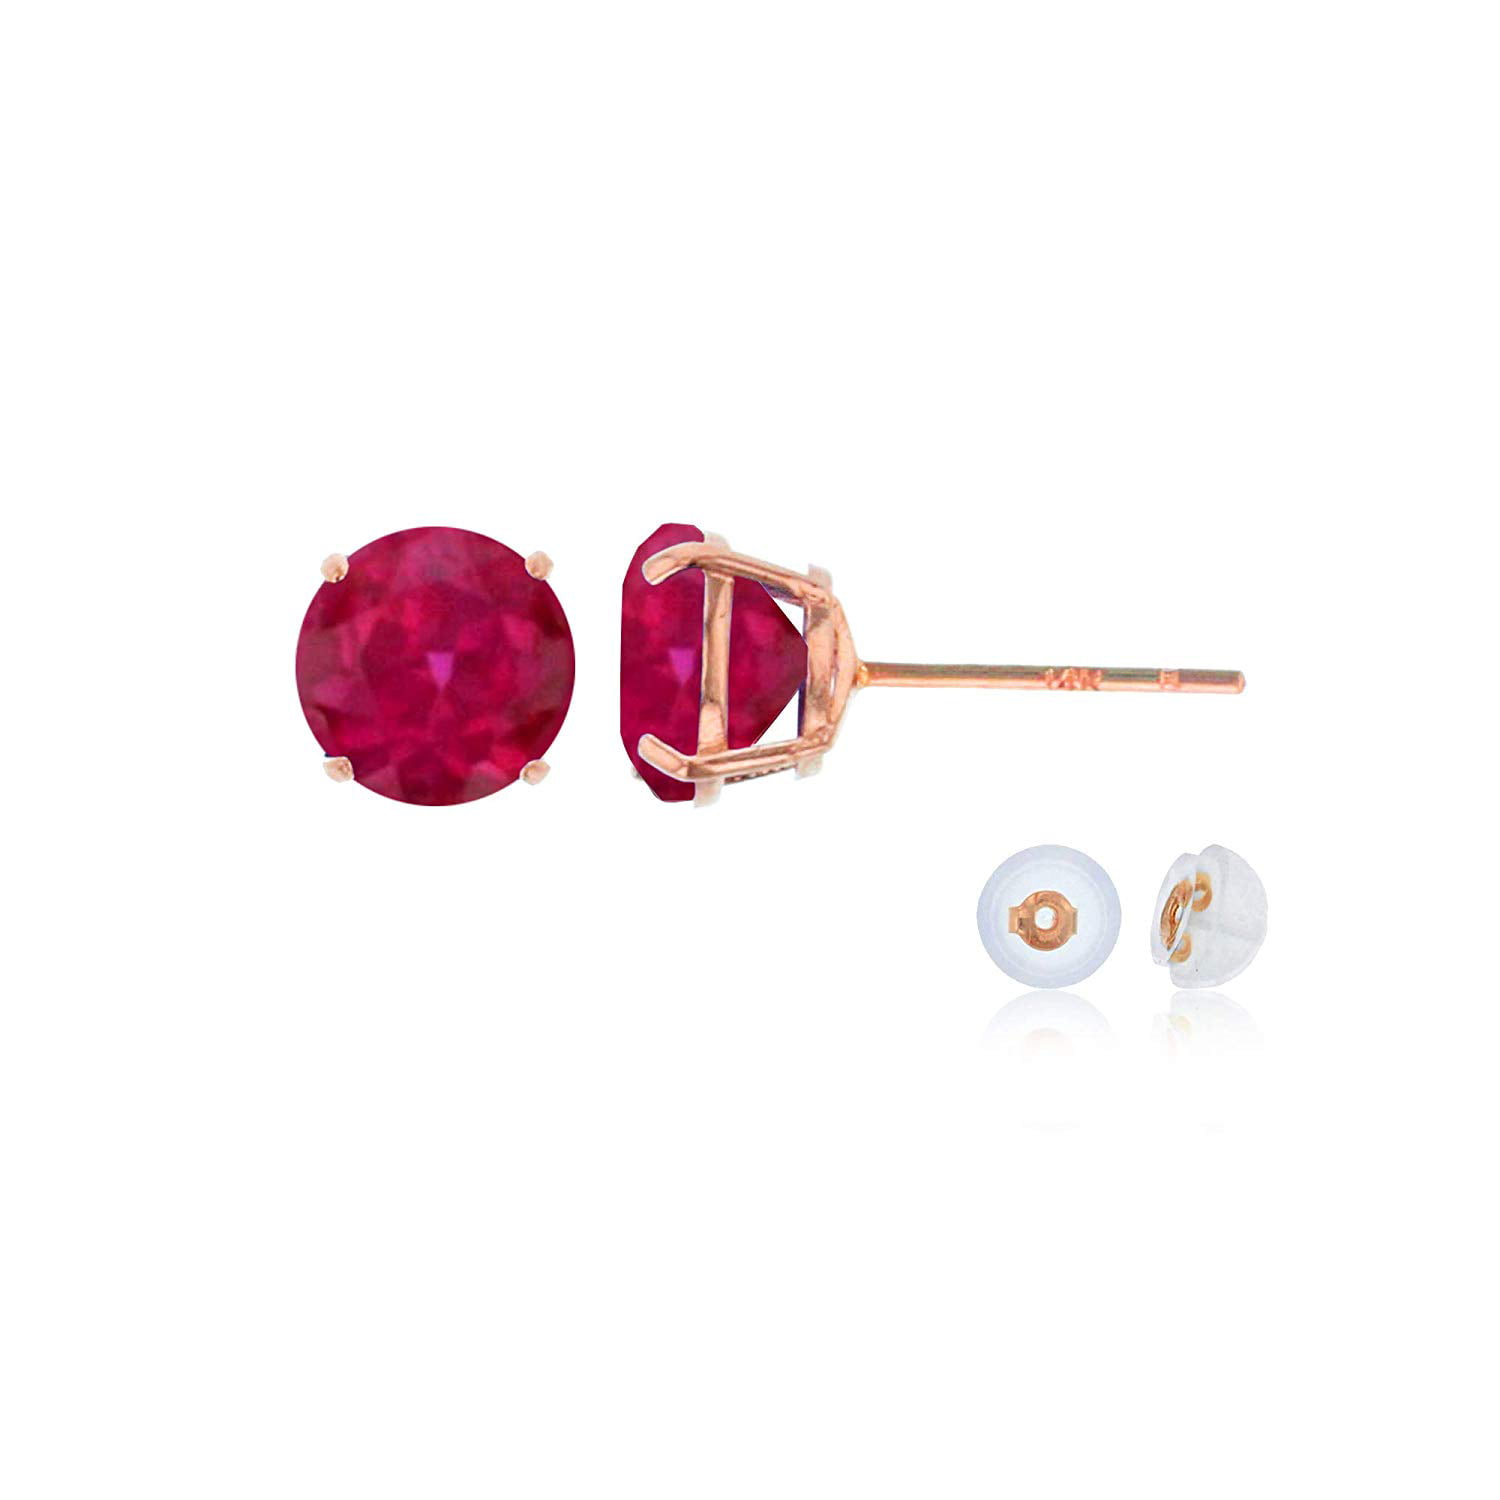 14k Solid Yellow Gold 6mm Round Birthstone Stud Earrings with Screw Back